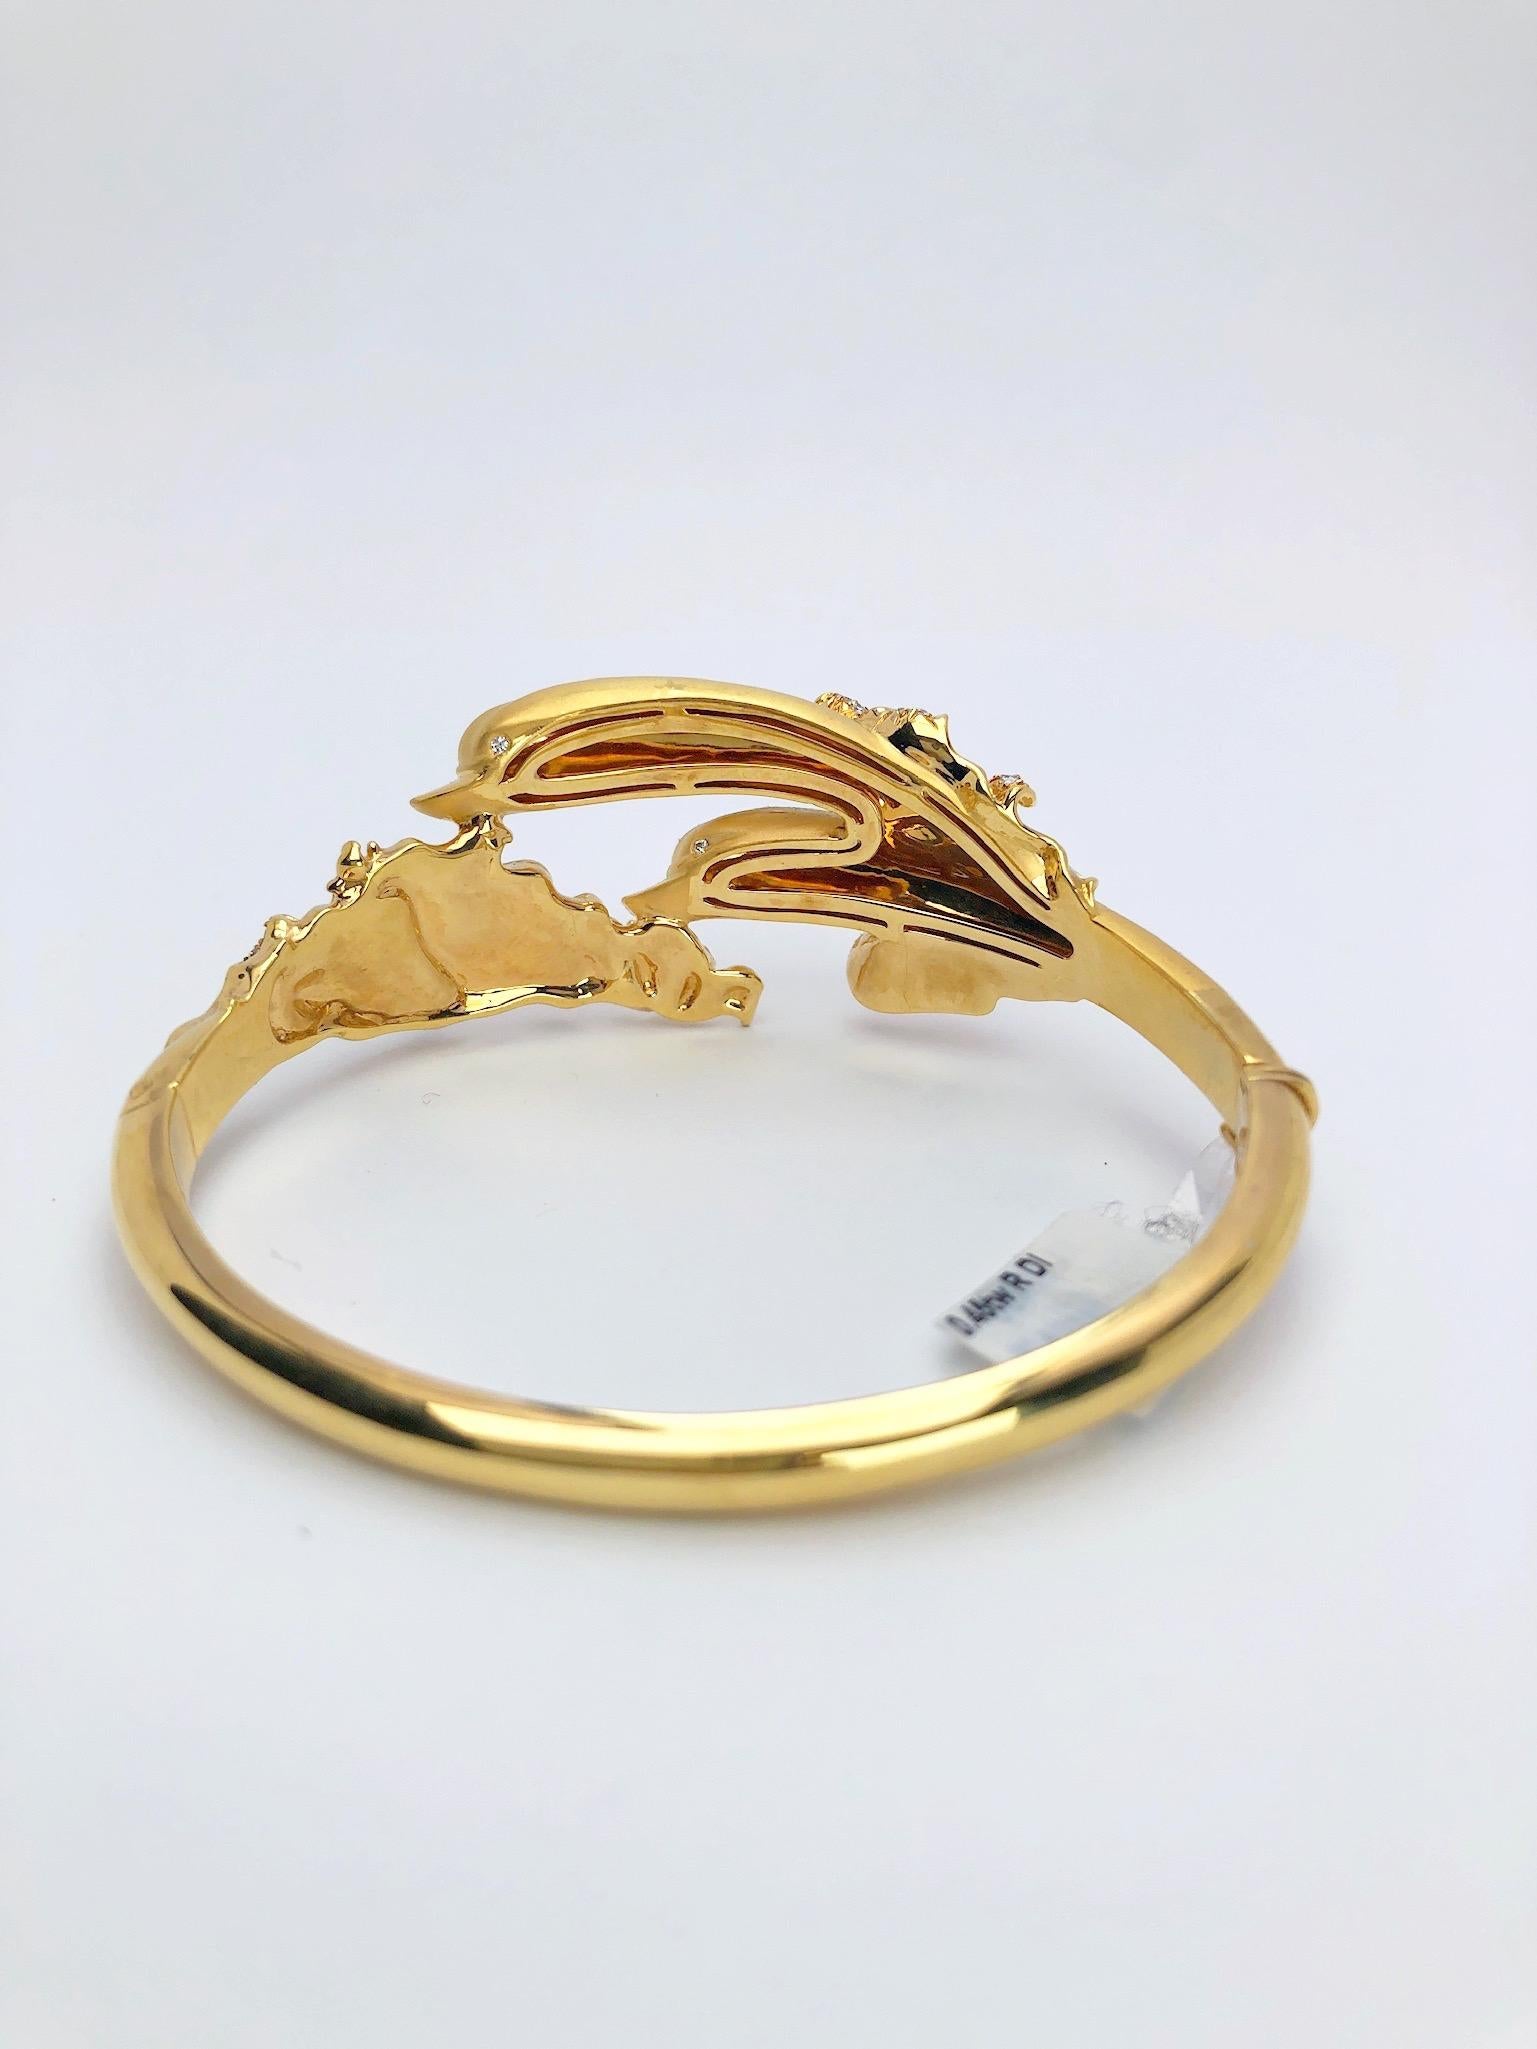 Contemporary Carrera y Carrera 18 Karat Yellow Gold Twin Dolphins Bracelet with Diamonds For Sale